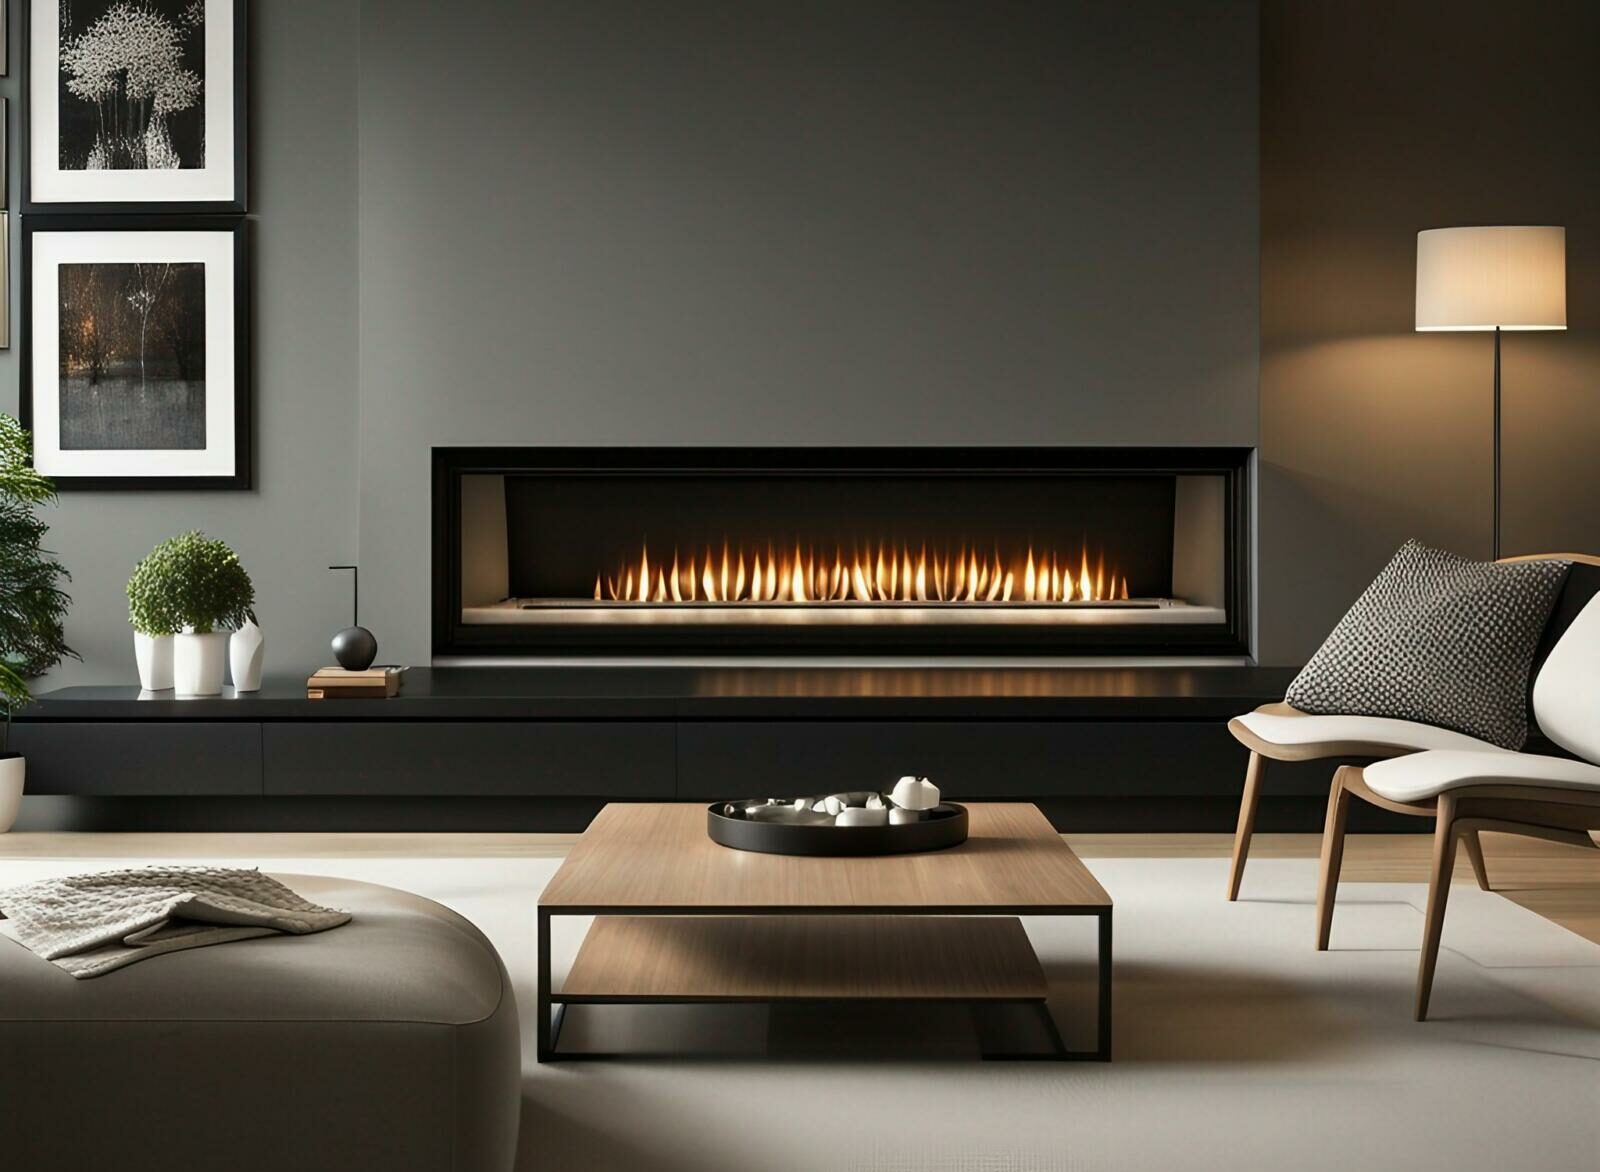 A modern living room with a contemporary fireplace.